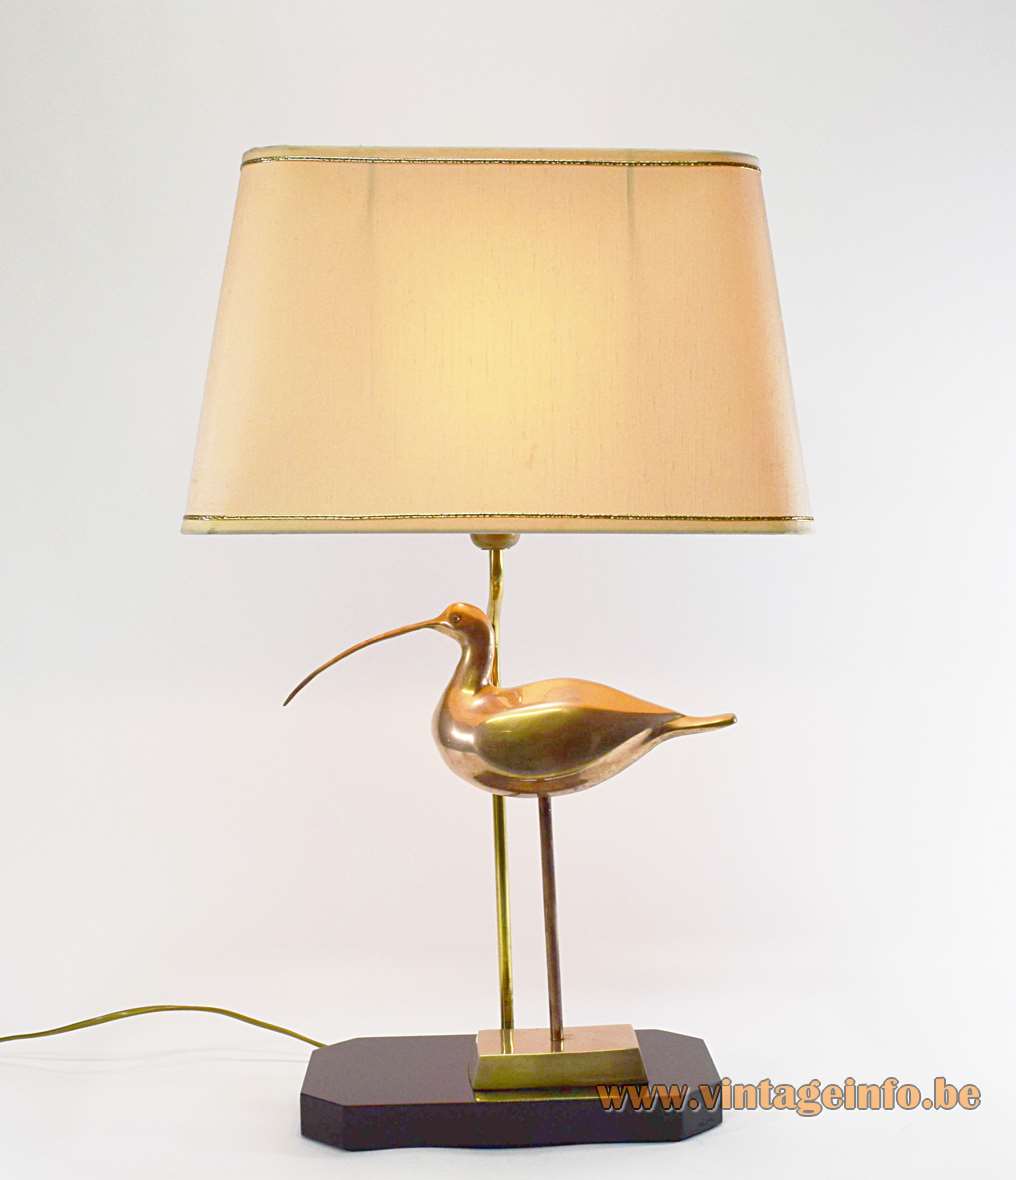 1970s brass ibis table lamps with a black wood base and brass bird by Massive Belgium